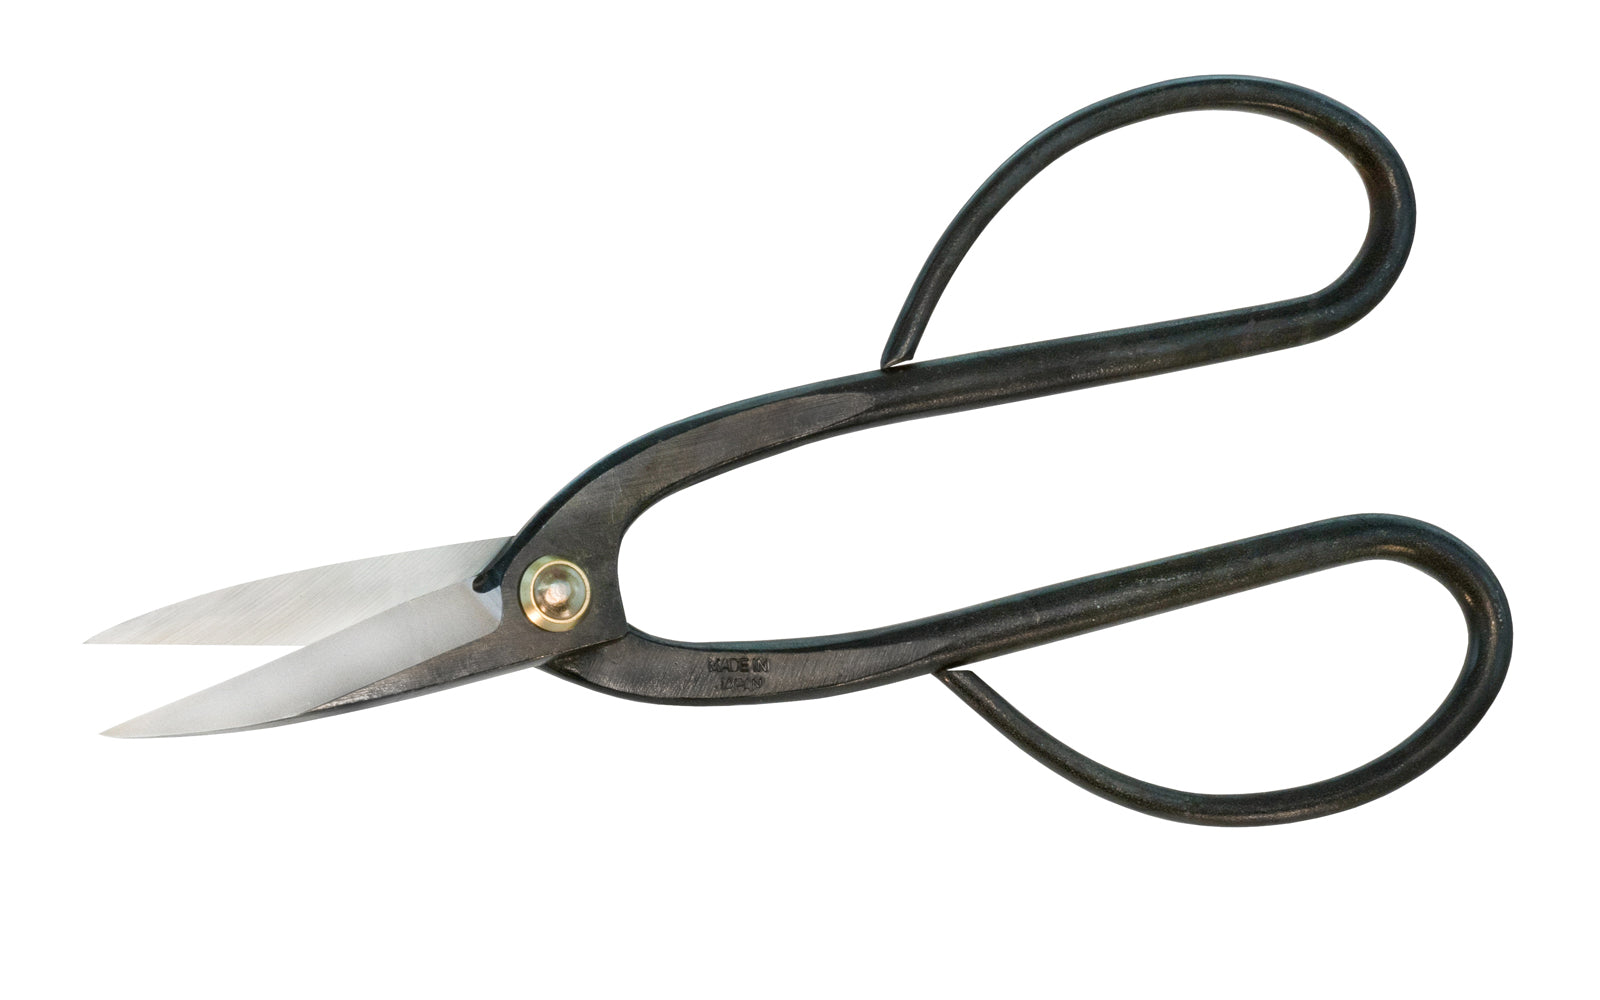 These Japanese Ashinaga Basami Shears are high quality snips for Bonsai, bud cutting, floral thinning, & other multi-purpose outdoor garden work. Made of high carbon steel, the cutting edges are sharp & cut nicely. Large handles for a good grip. Works excellent for thinning & defoliating Bonsai. Made in Japan.